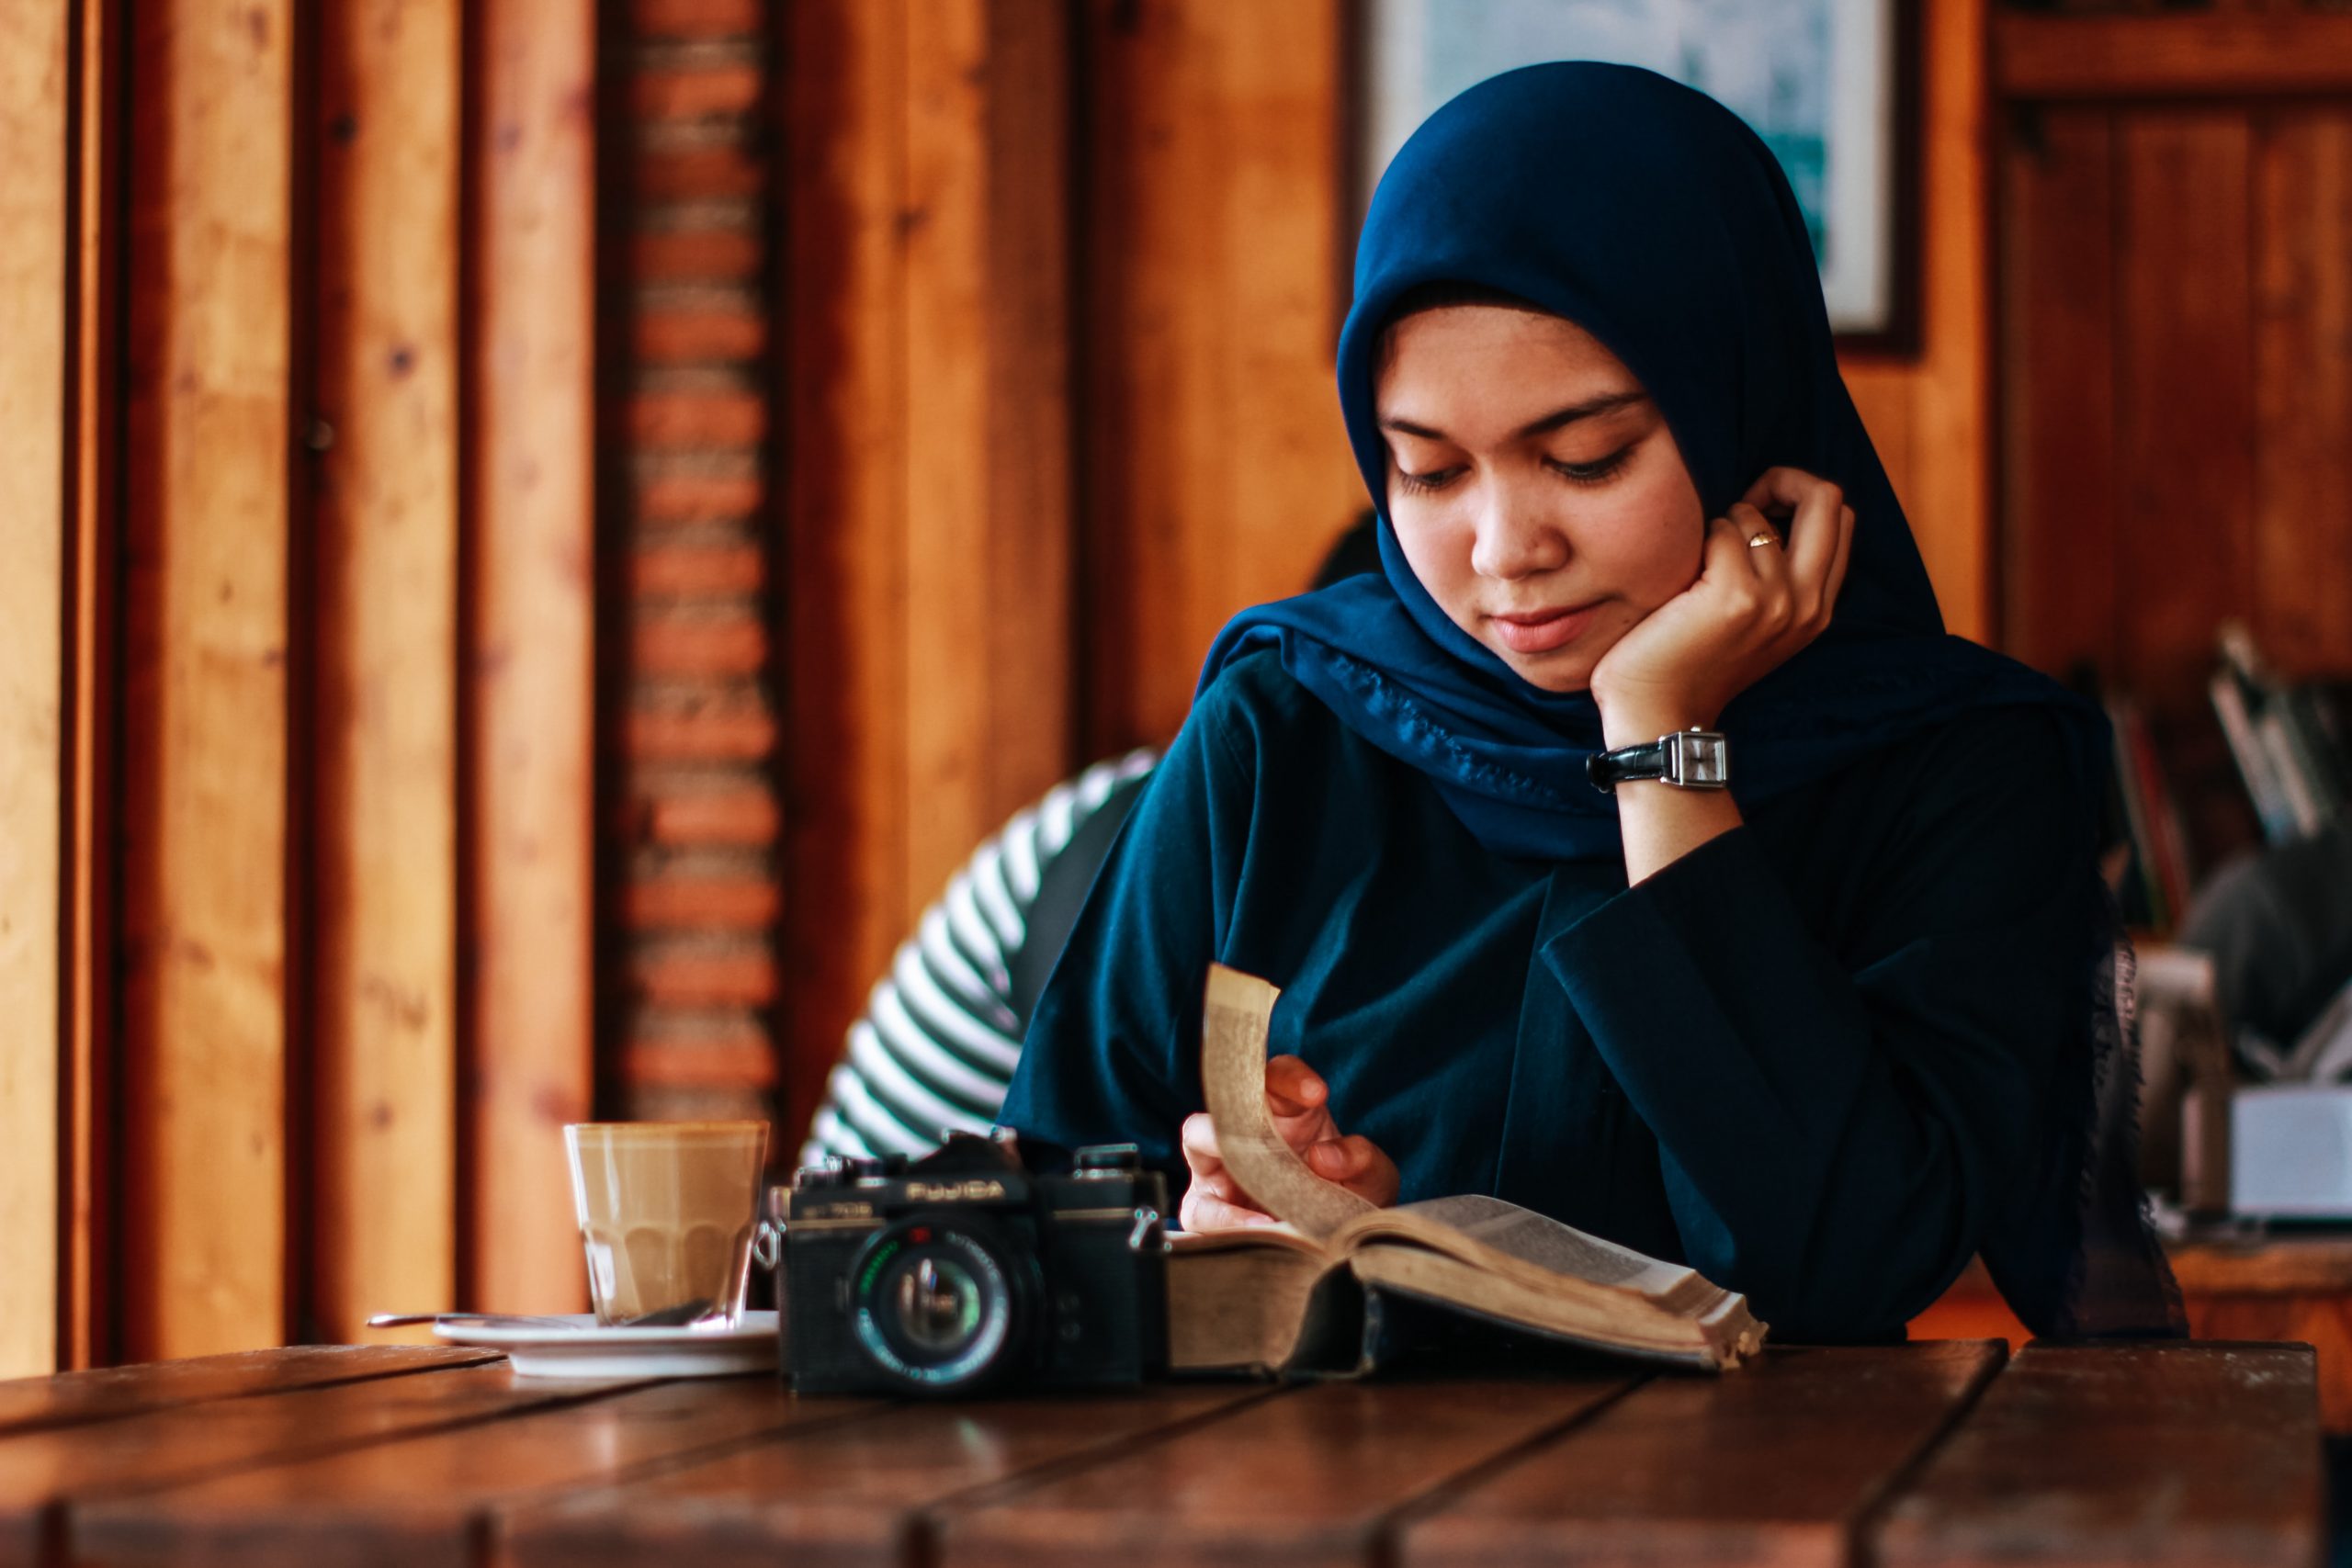 A woman sits at a table and contemplates. She wears a hijab.